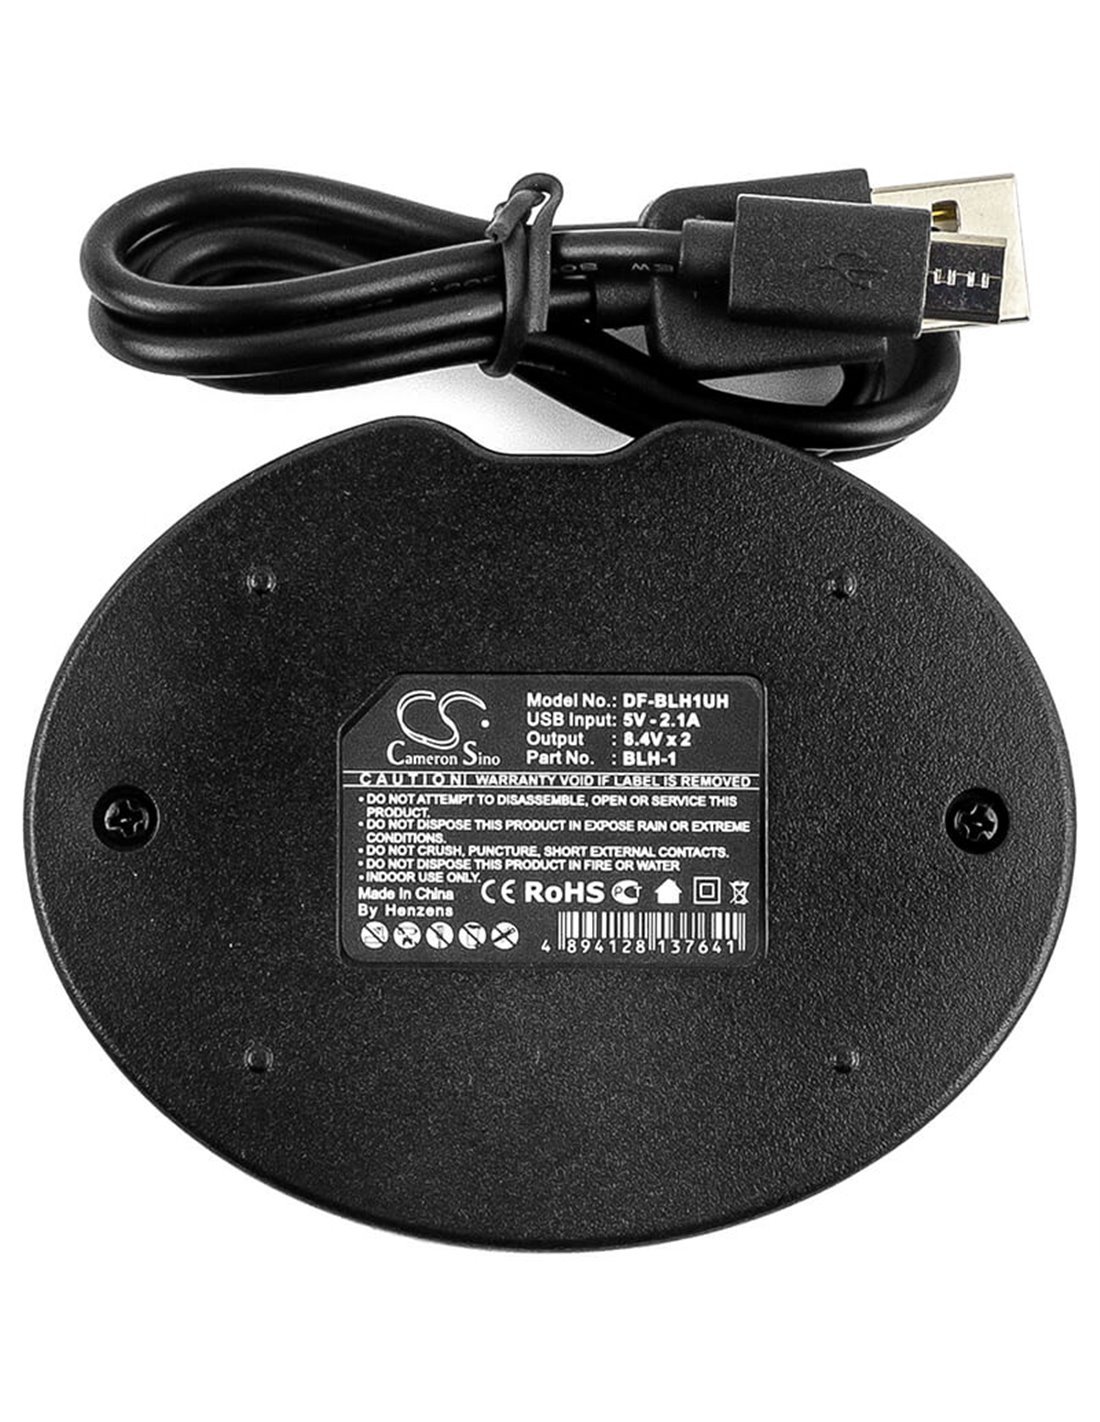 Olympus Bch-1, Blh-1 Camera Charger